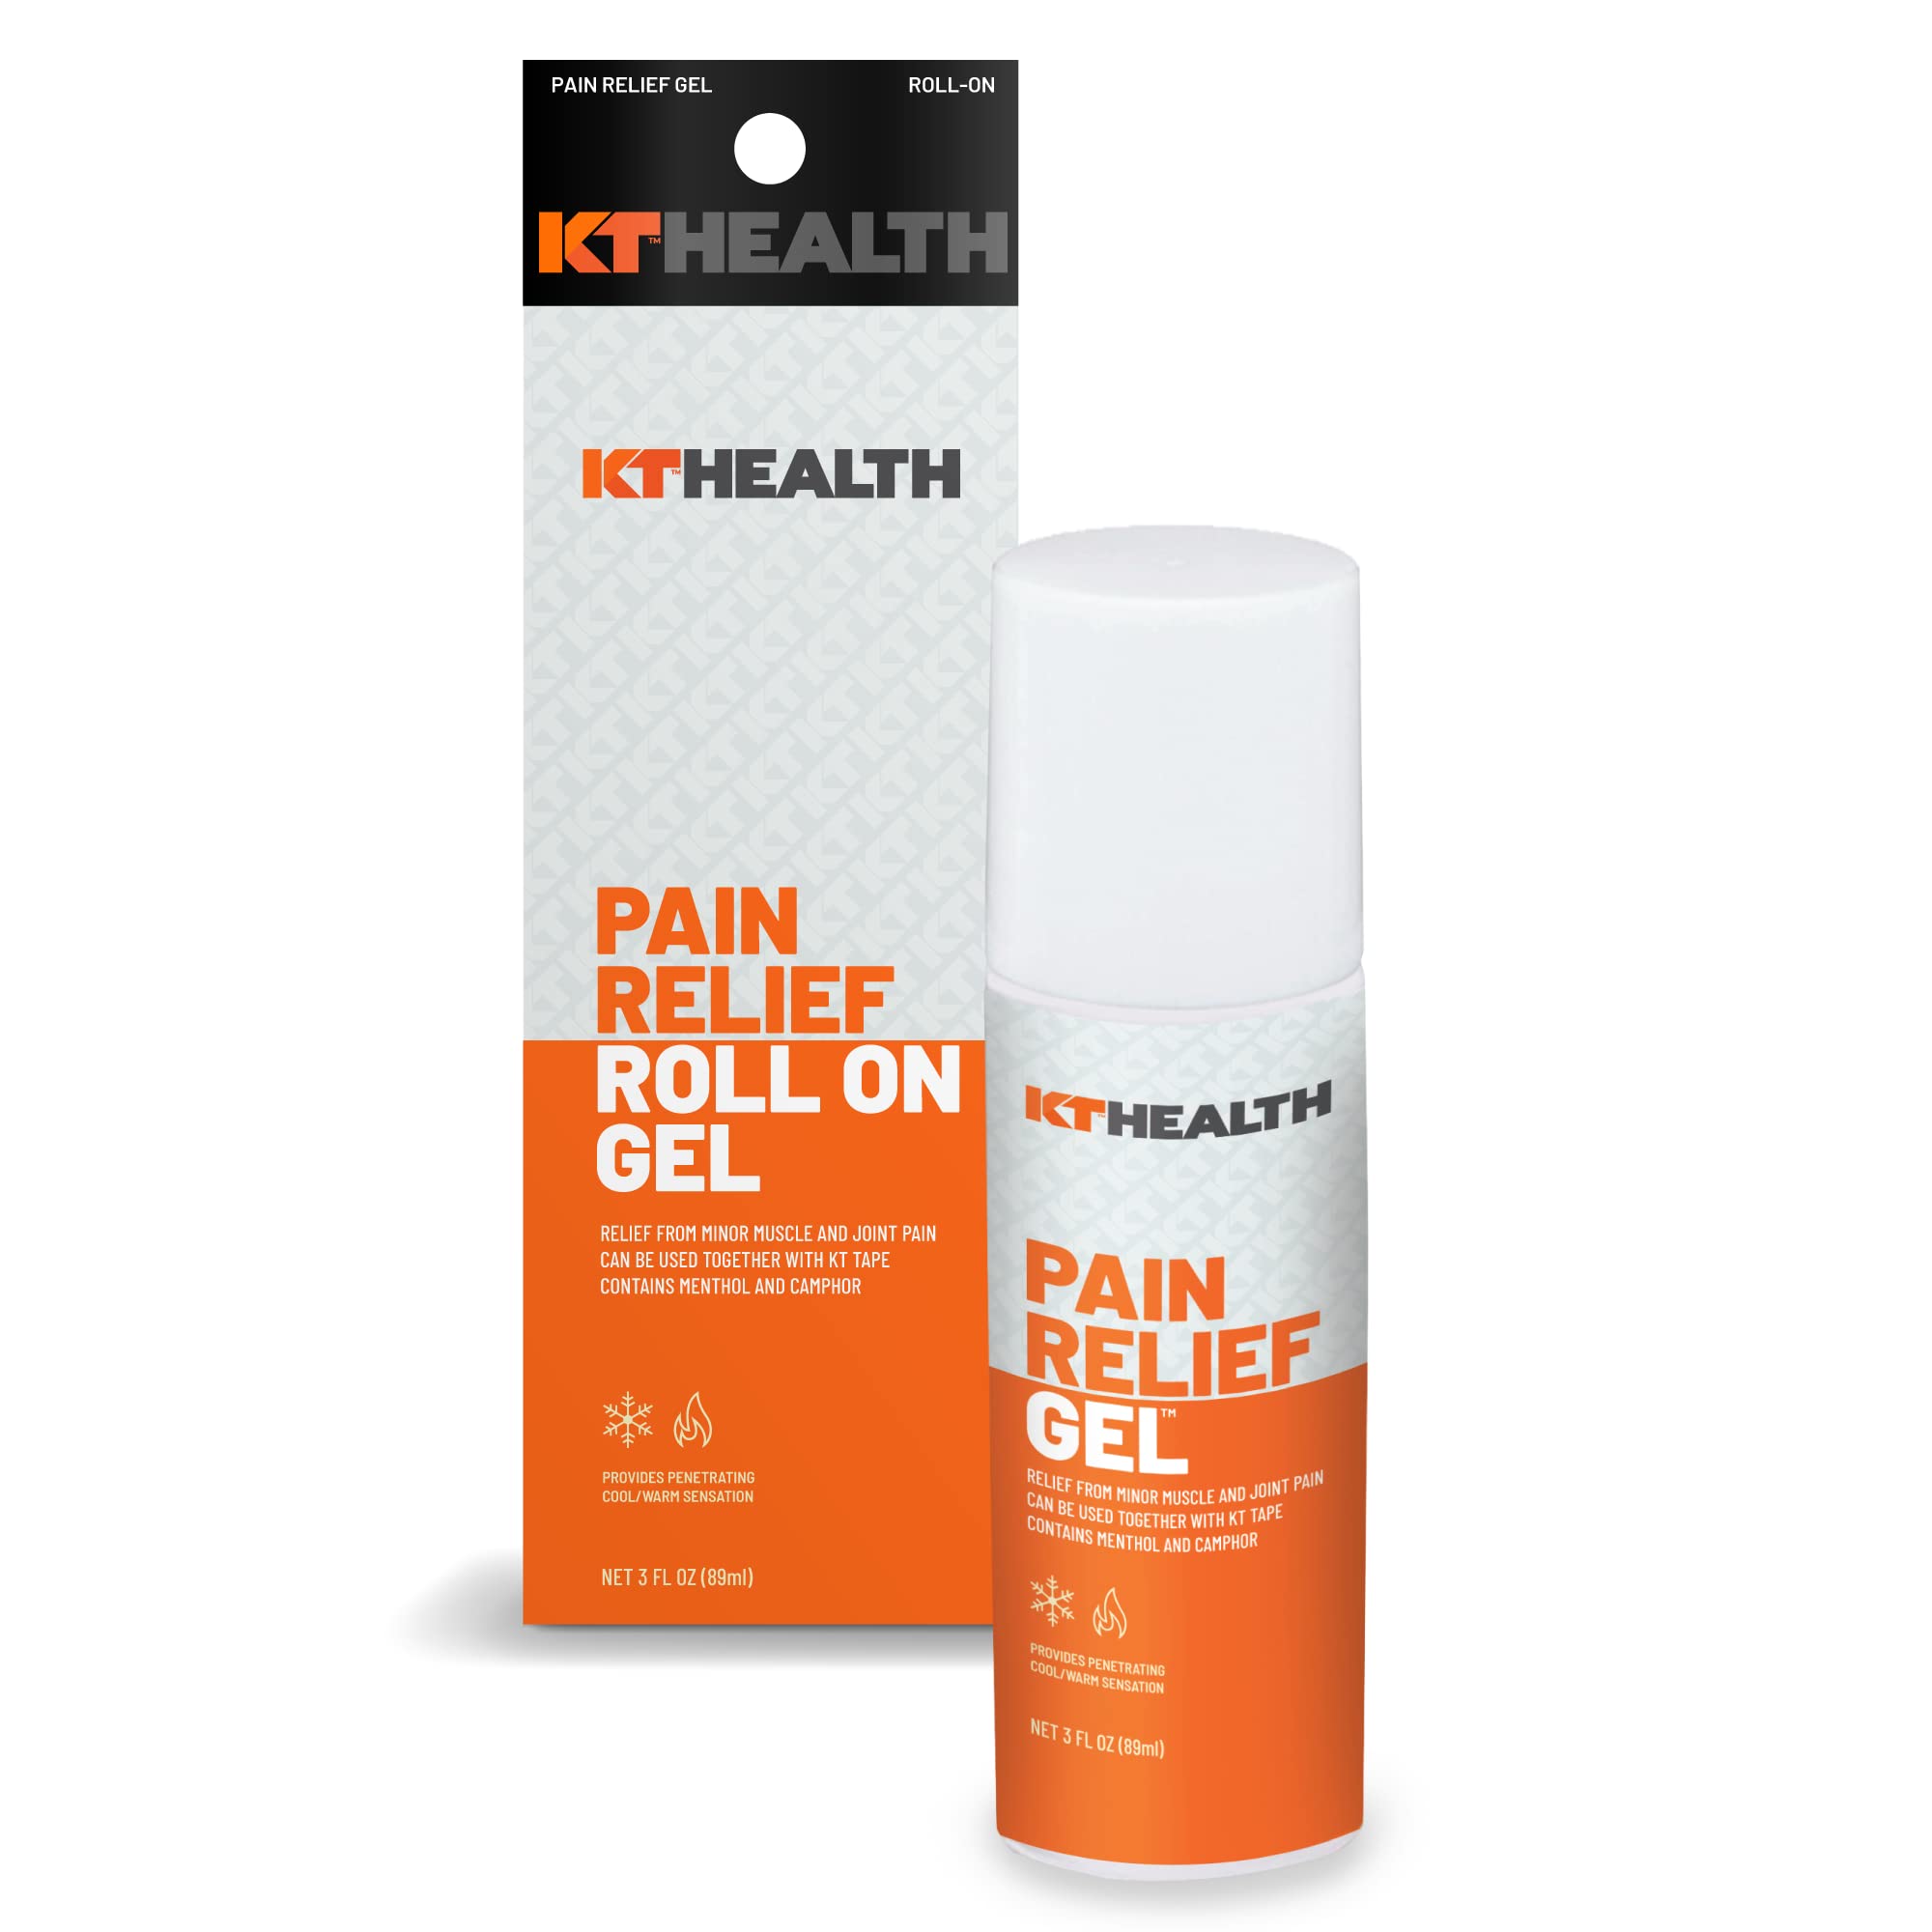 KT Recovery+ by KT Tape Pain Relief Gel, Timed release topical pain relief gel for back pain, sciatica pain, arthritis pain, 3 oz Roll On Tube